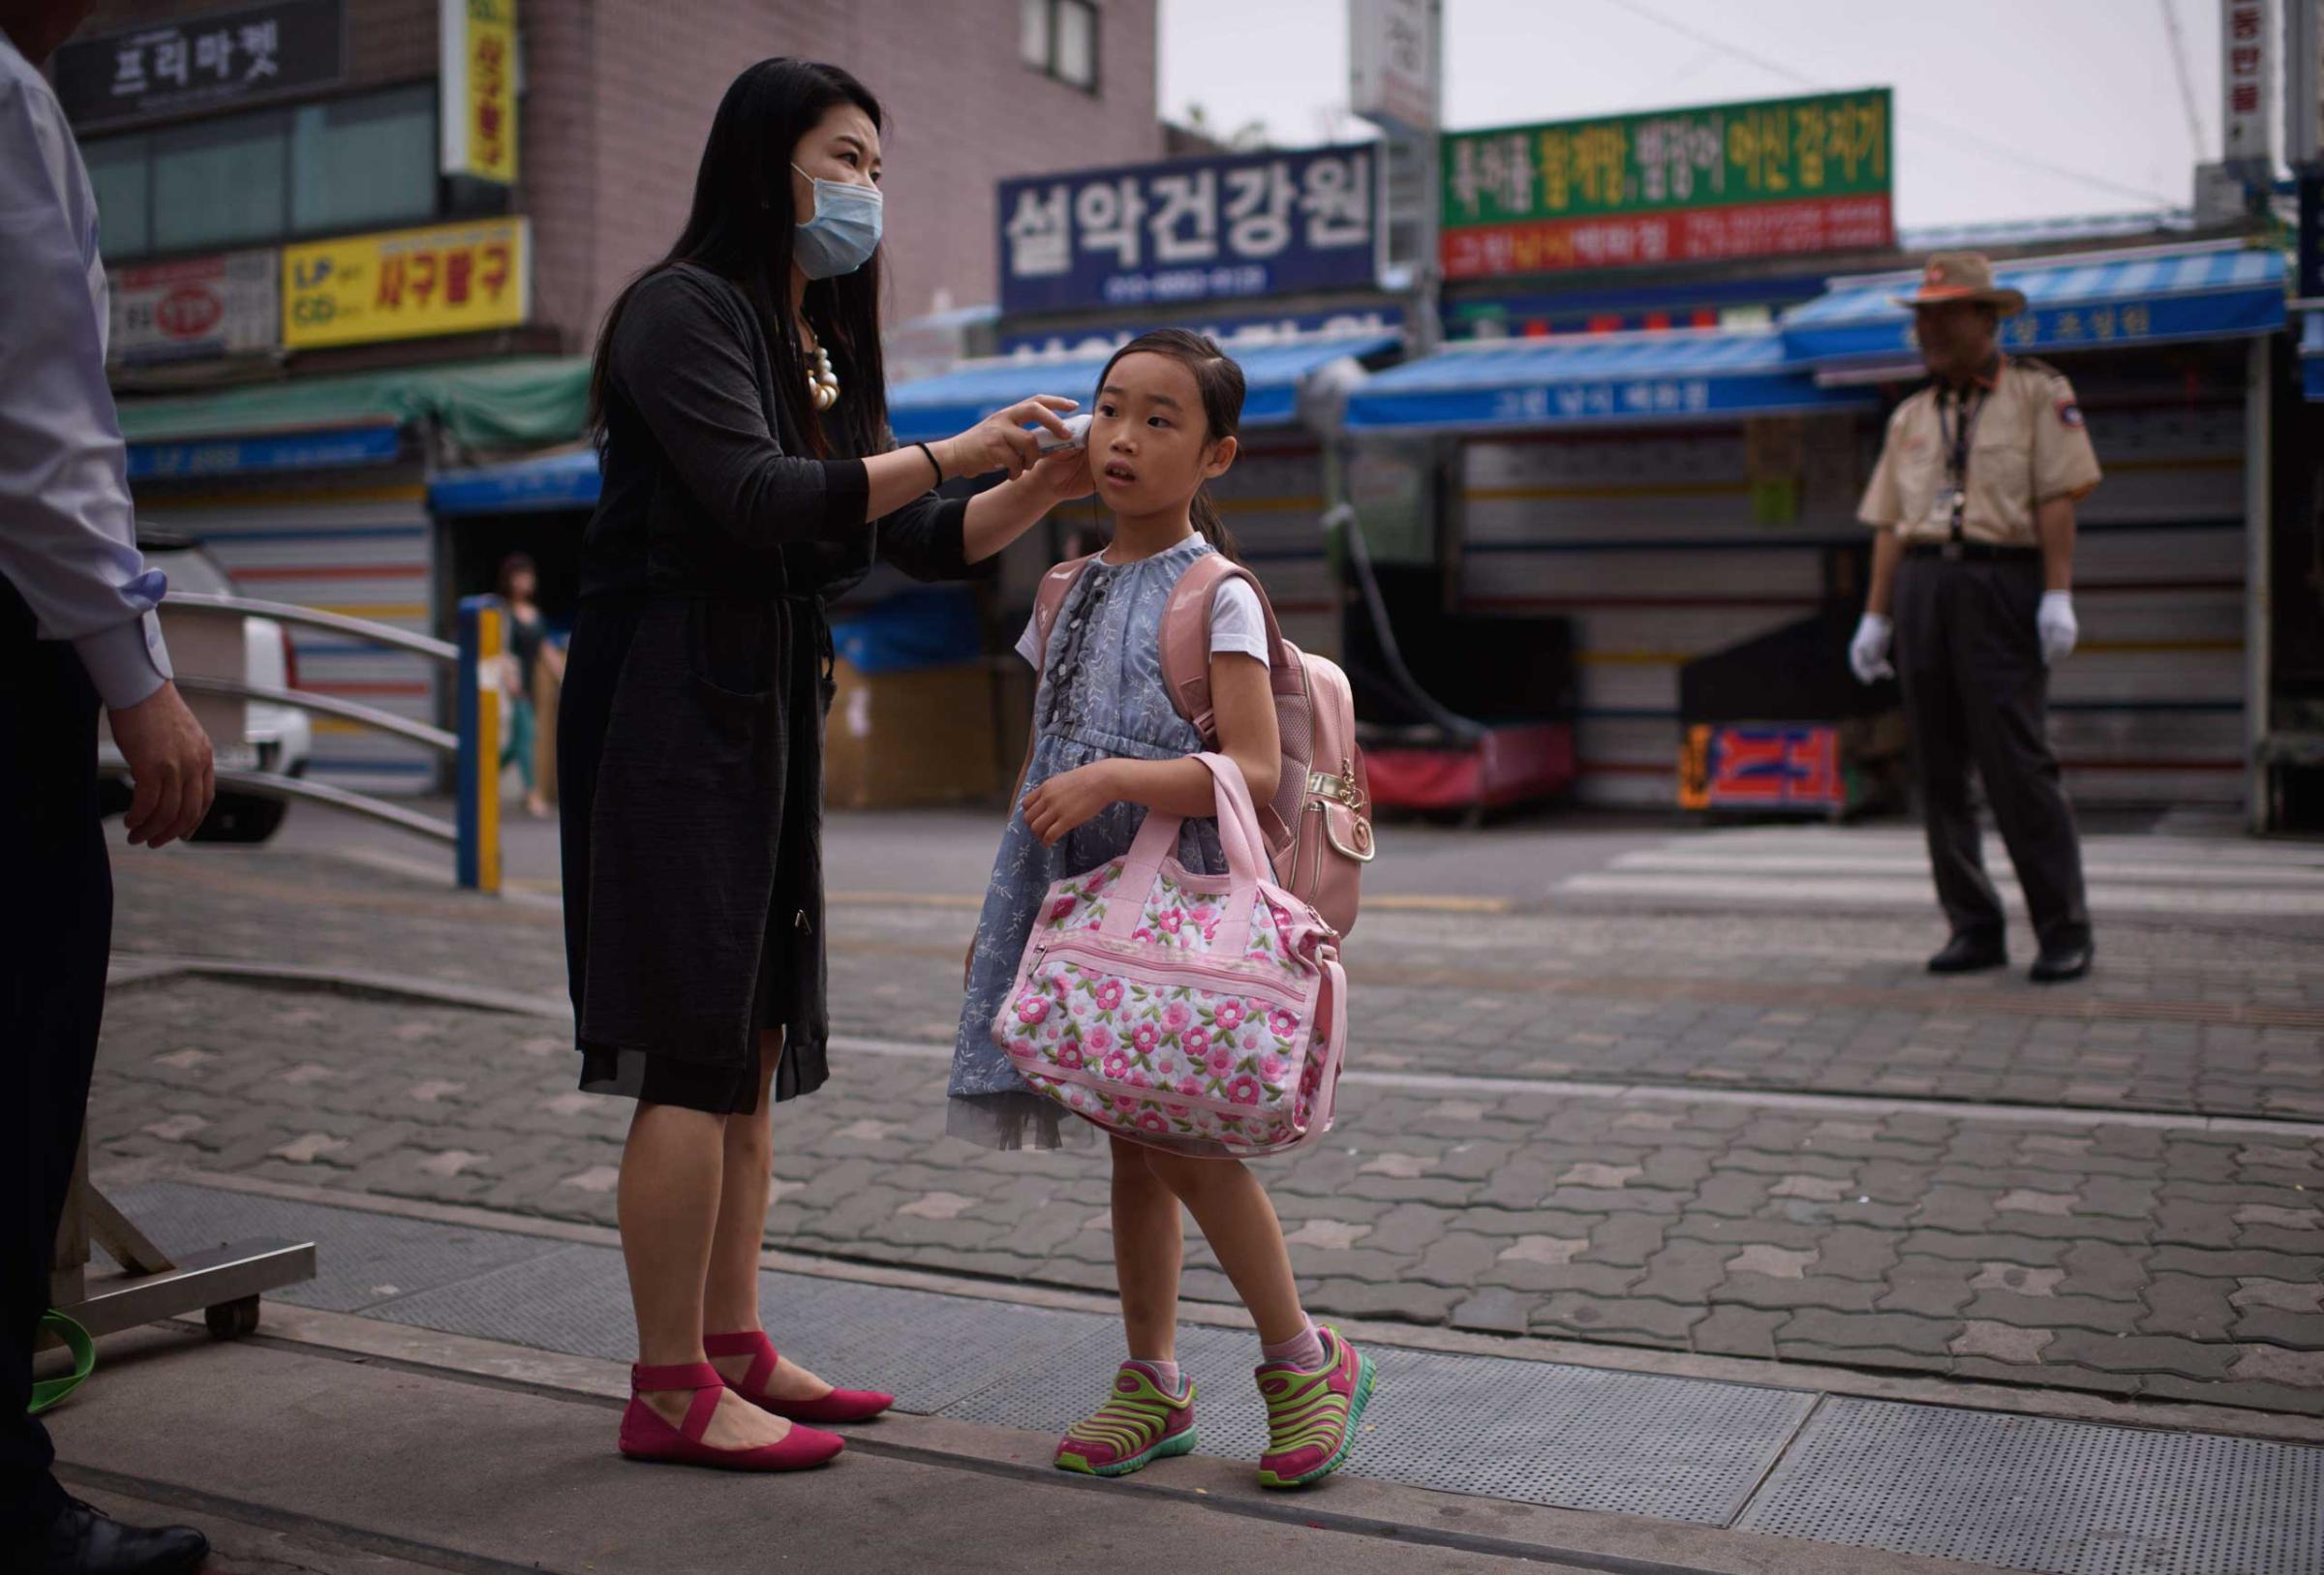 A student has her temperature taken by a teacher outside the Sungshin elementary school in Seoul on June 8, 2015.